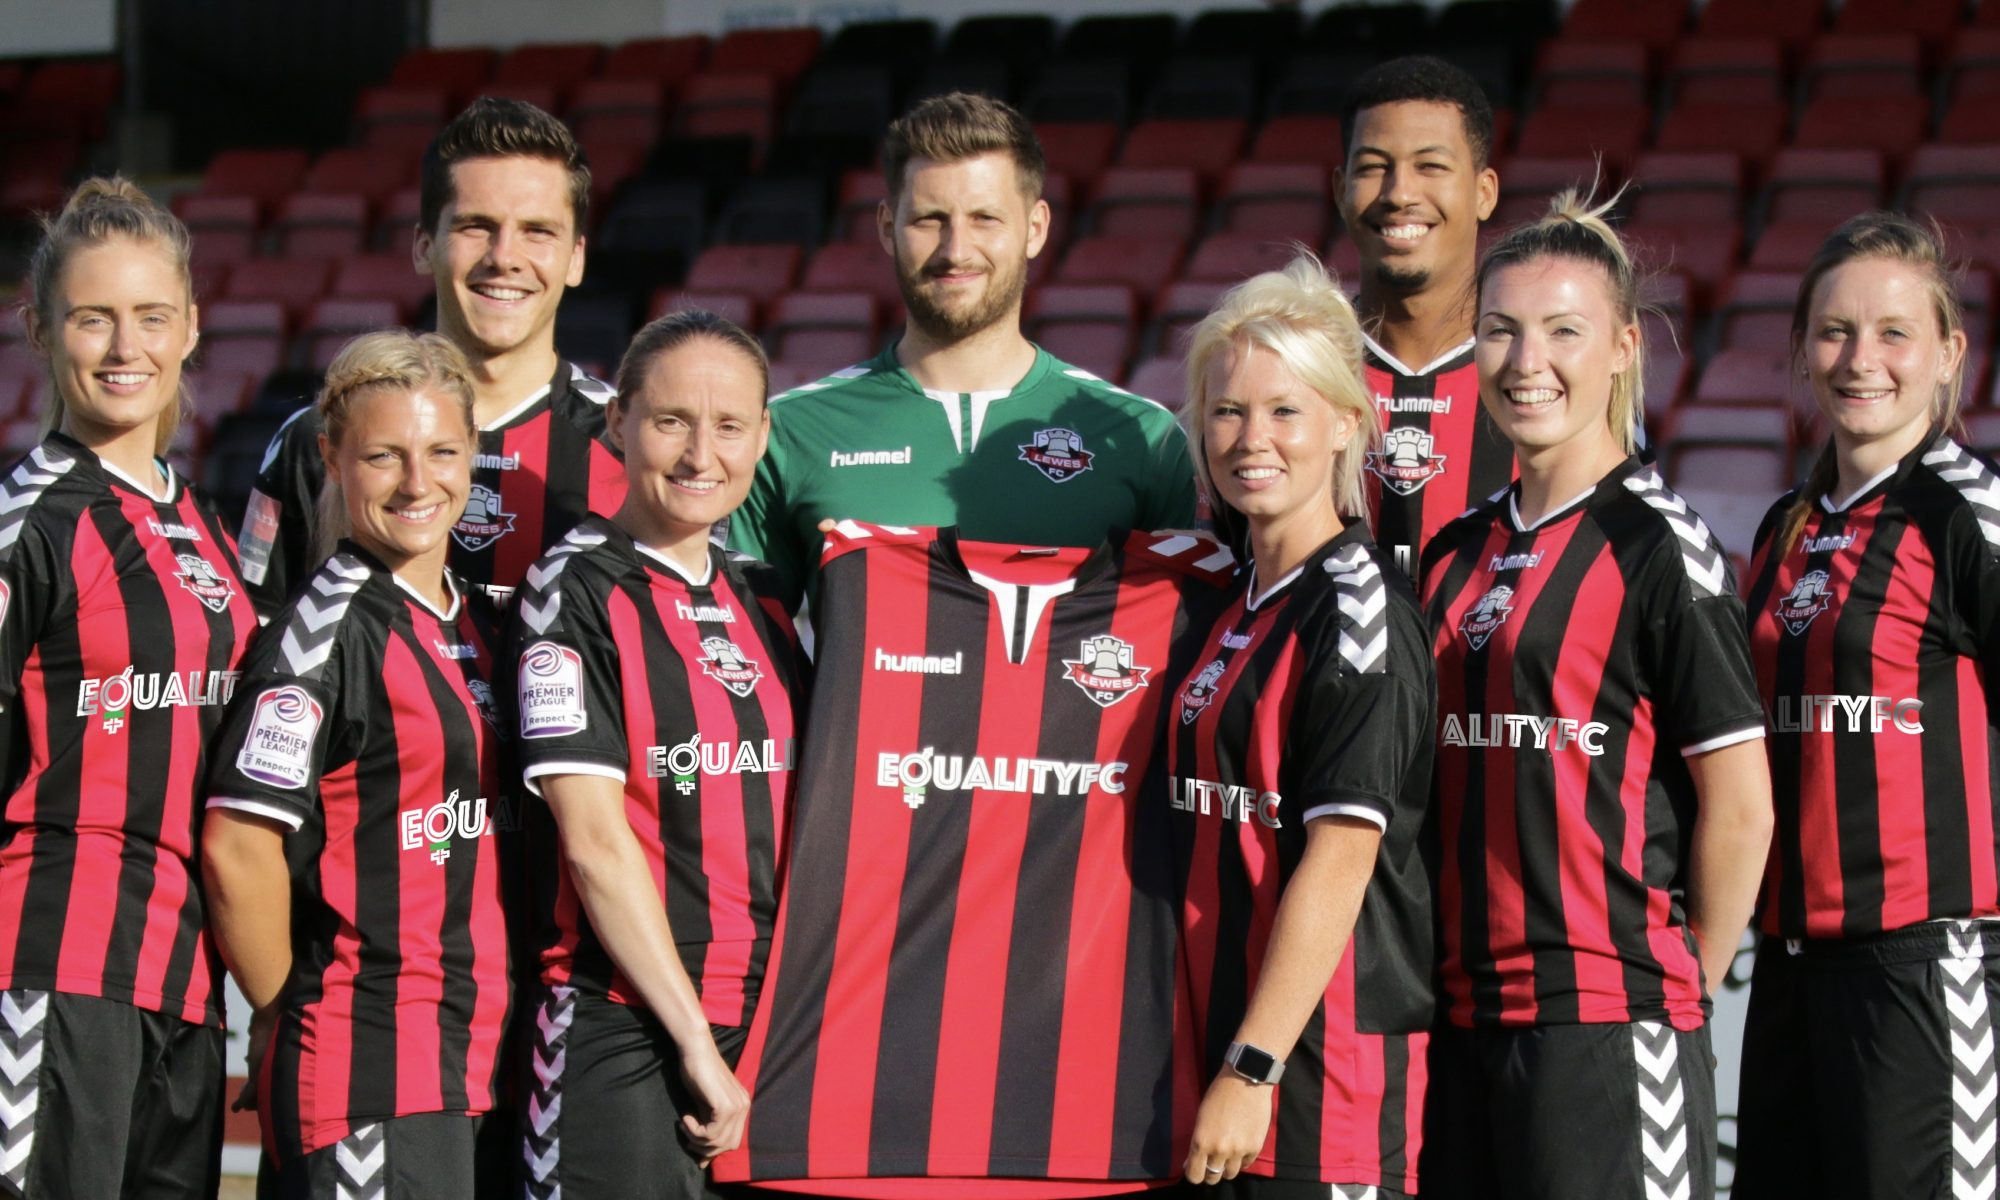 Lewes FC pays its men and women the same ©Equality FC